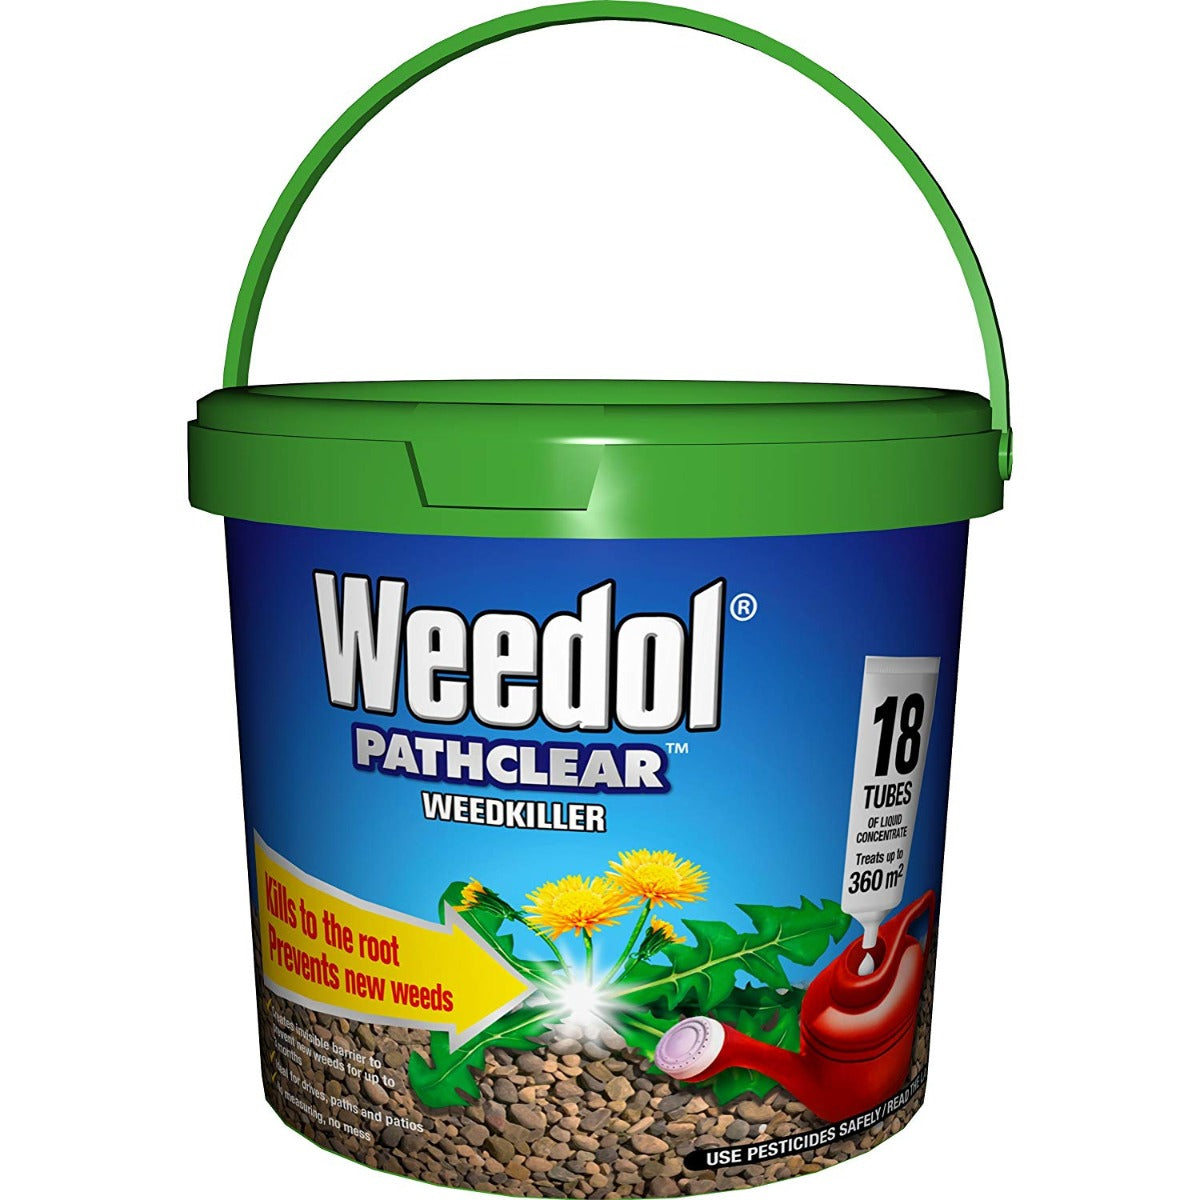 Weedol Pathclear Weedkiller Liquid Concentrate 18 Tubes